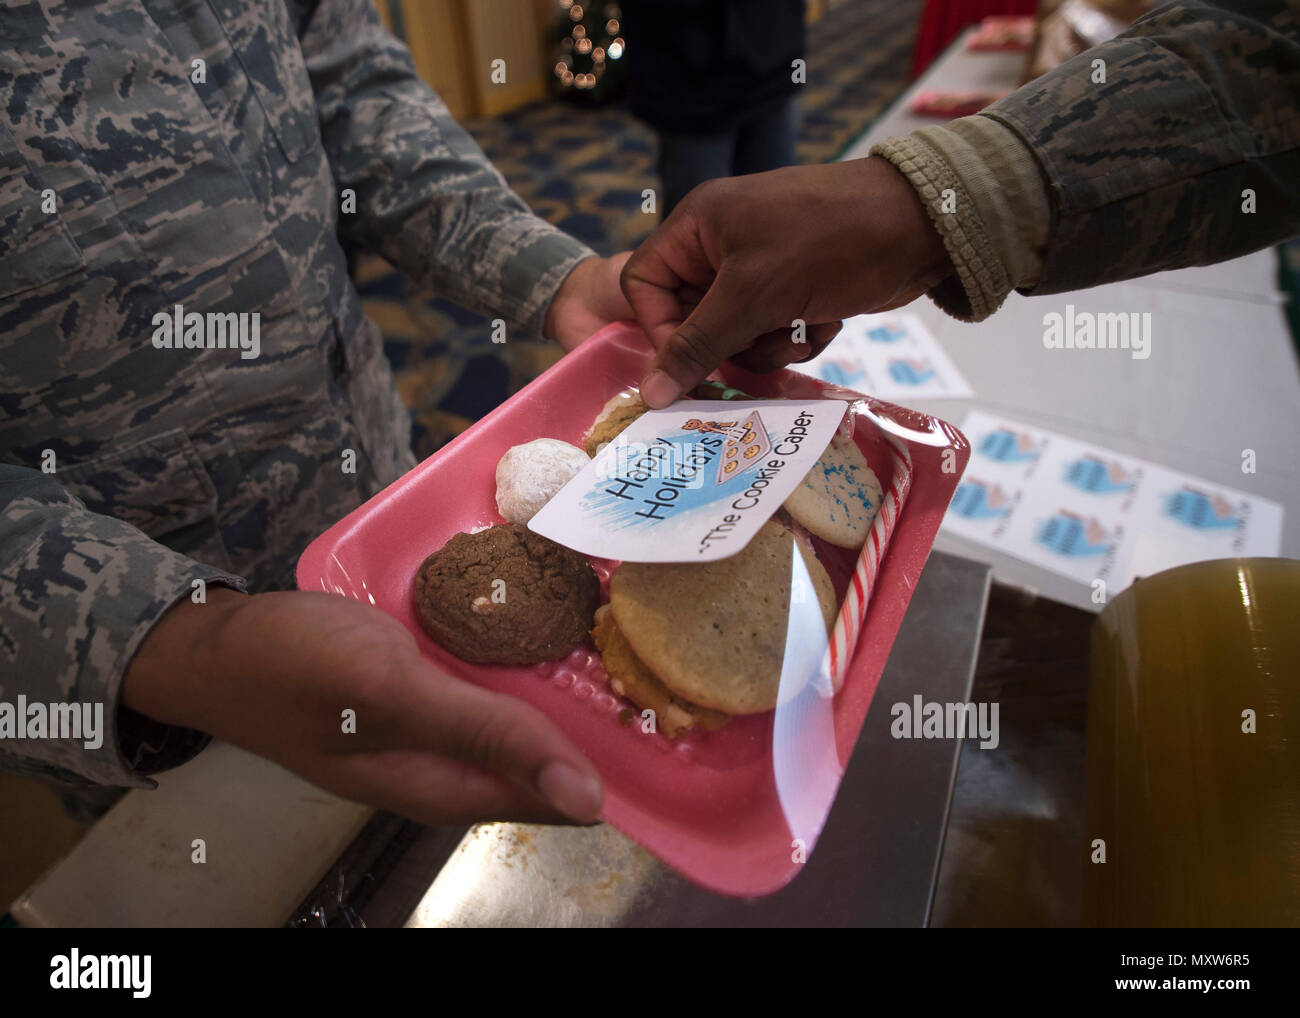 U.S. Air Force Airmen package cookies for delivery during the annual Cookie Caper event at Misawa Air Base, Japan, Dec. 7, 2016. After the cookies are divided and packaged, first sergeants and other leadership across the base hand delivered them to their units.  (U.S. Air Force photo by Senior Airman Deana Heitzman) Stock Photo